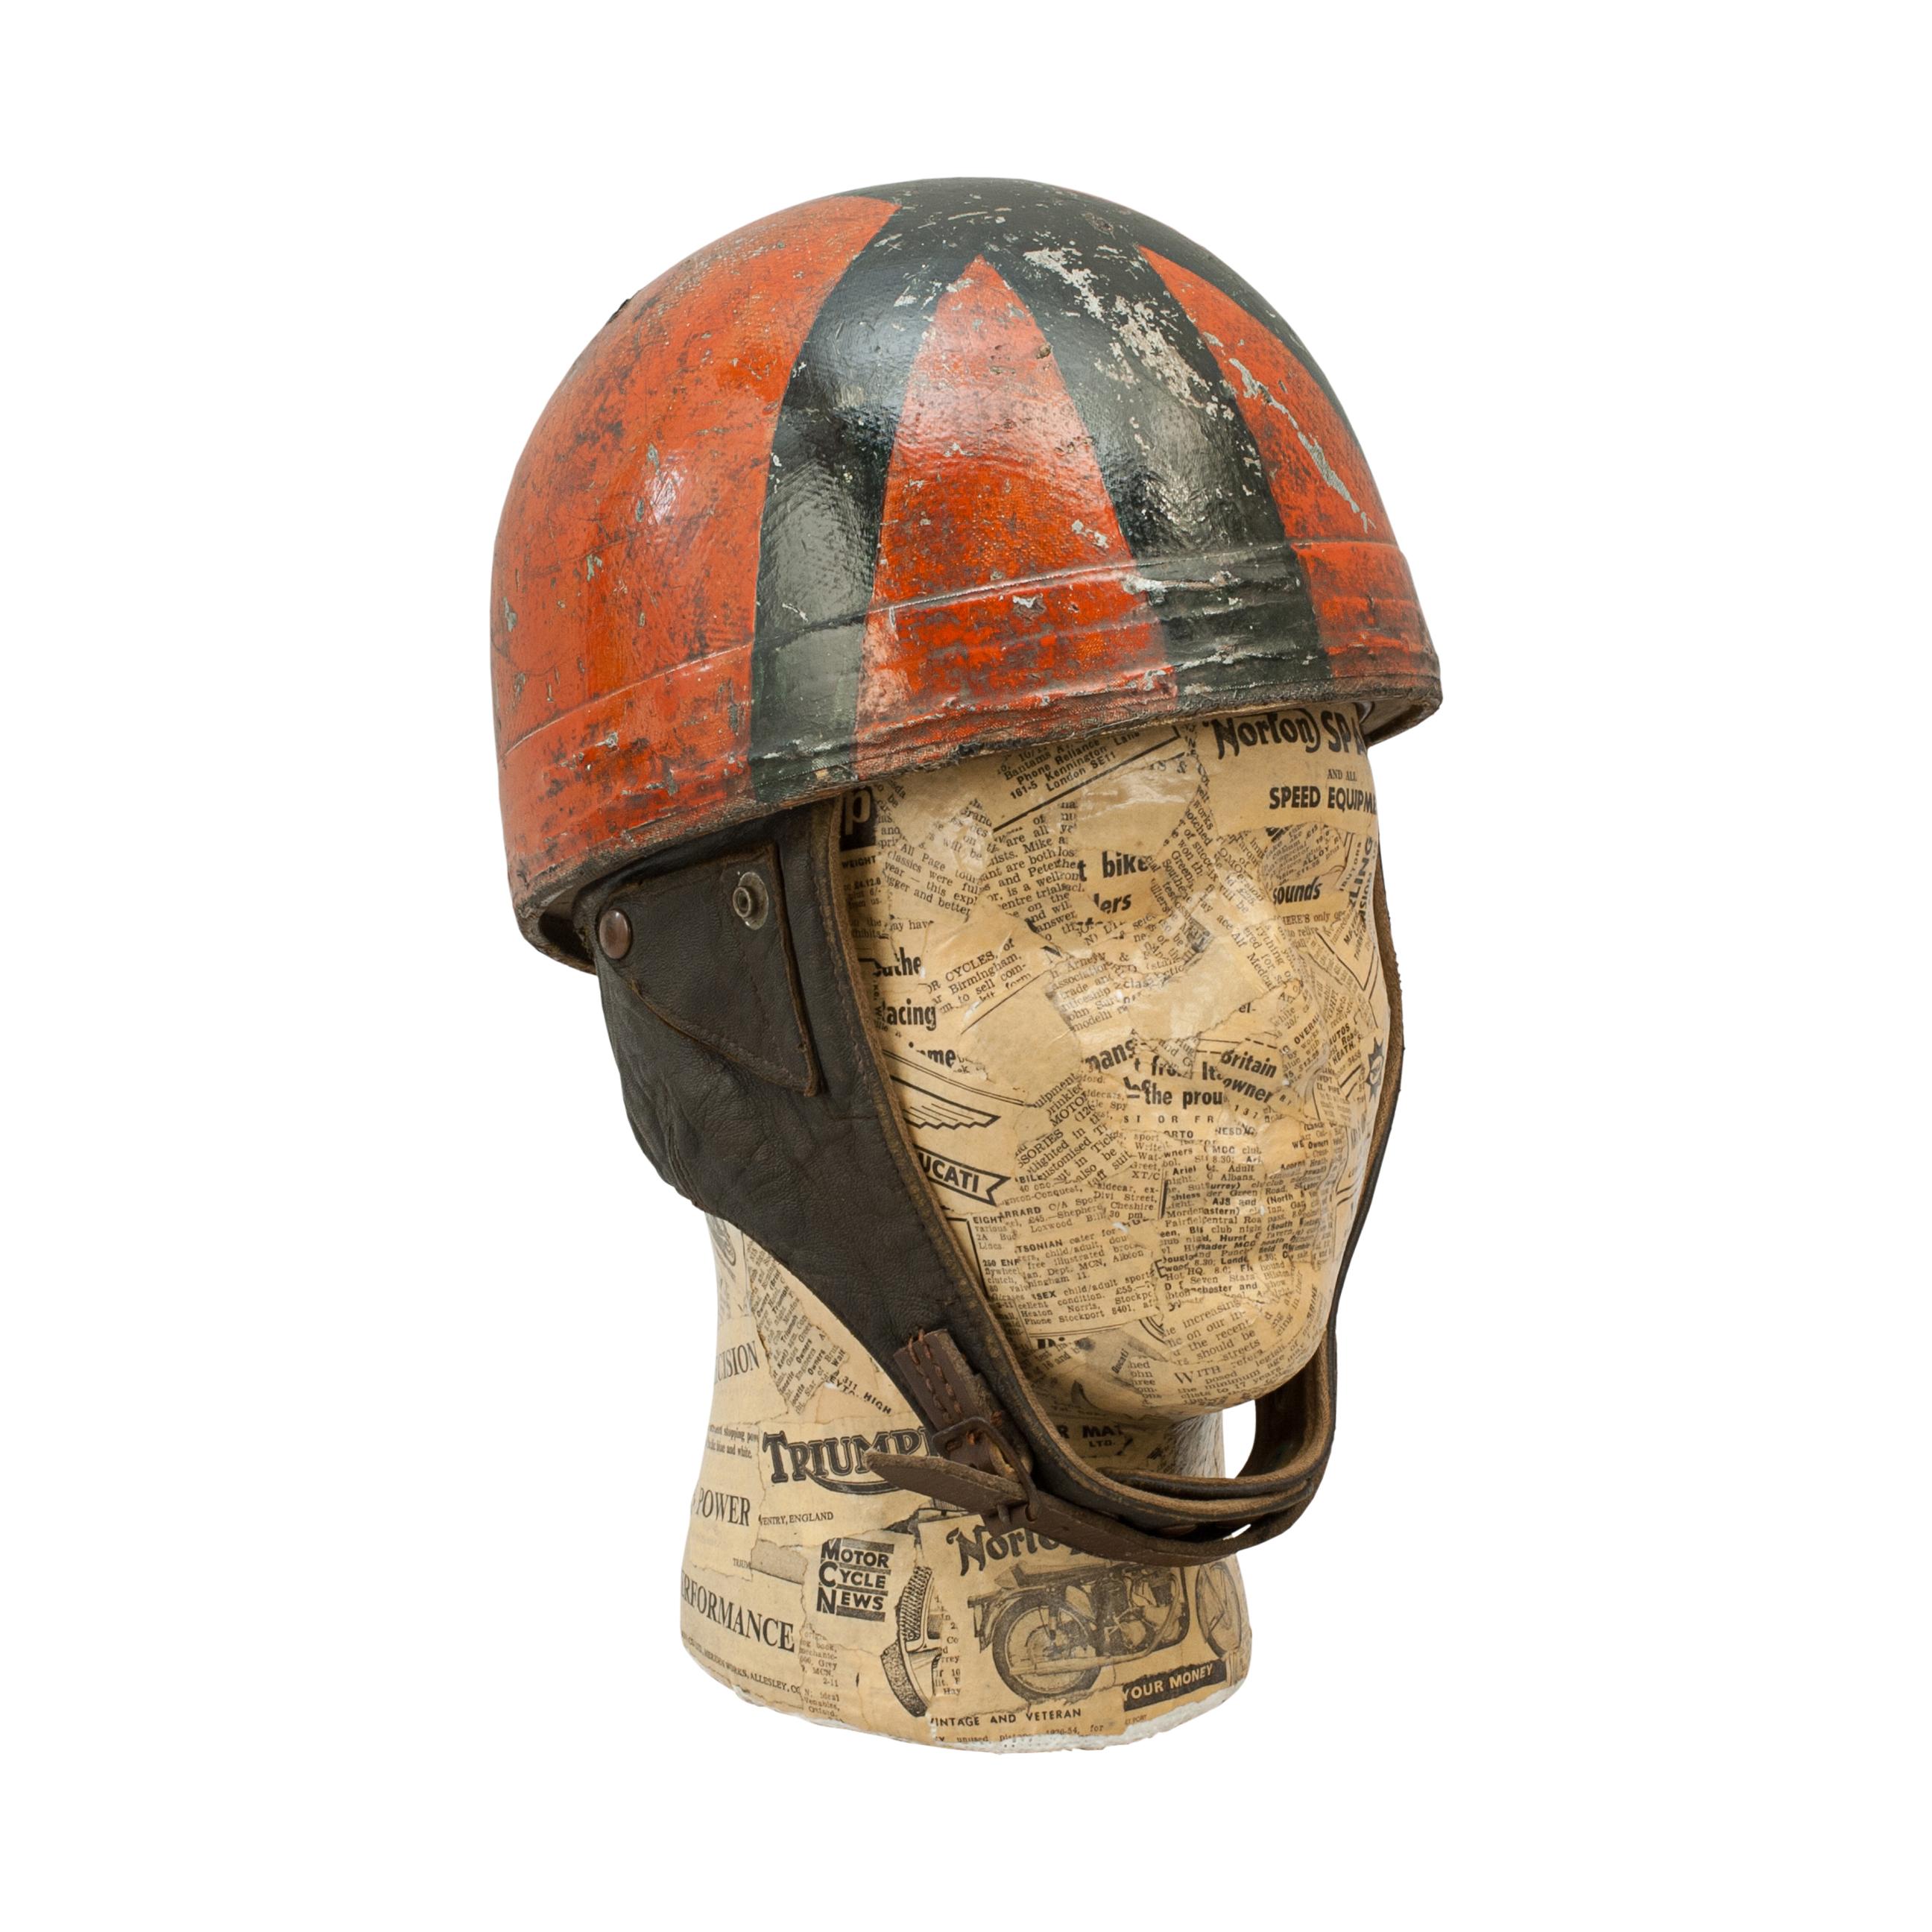 Vintage Cromwell motorcycling racing crash helmet.
A red and black motorcycle, pudding basin shape helmet made in England by Cromwell. This helmet has a cork interior, fitted with a leather headband and cloth straps keeping a space between the head